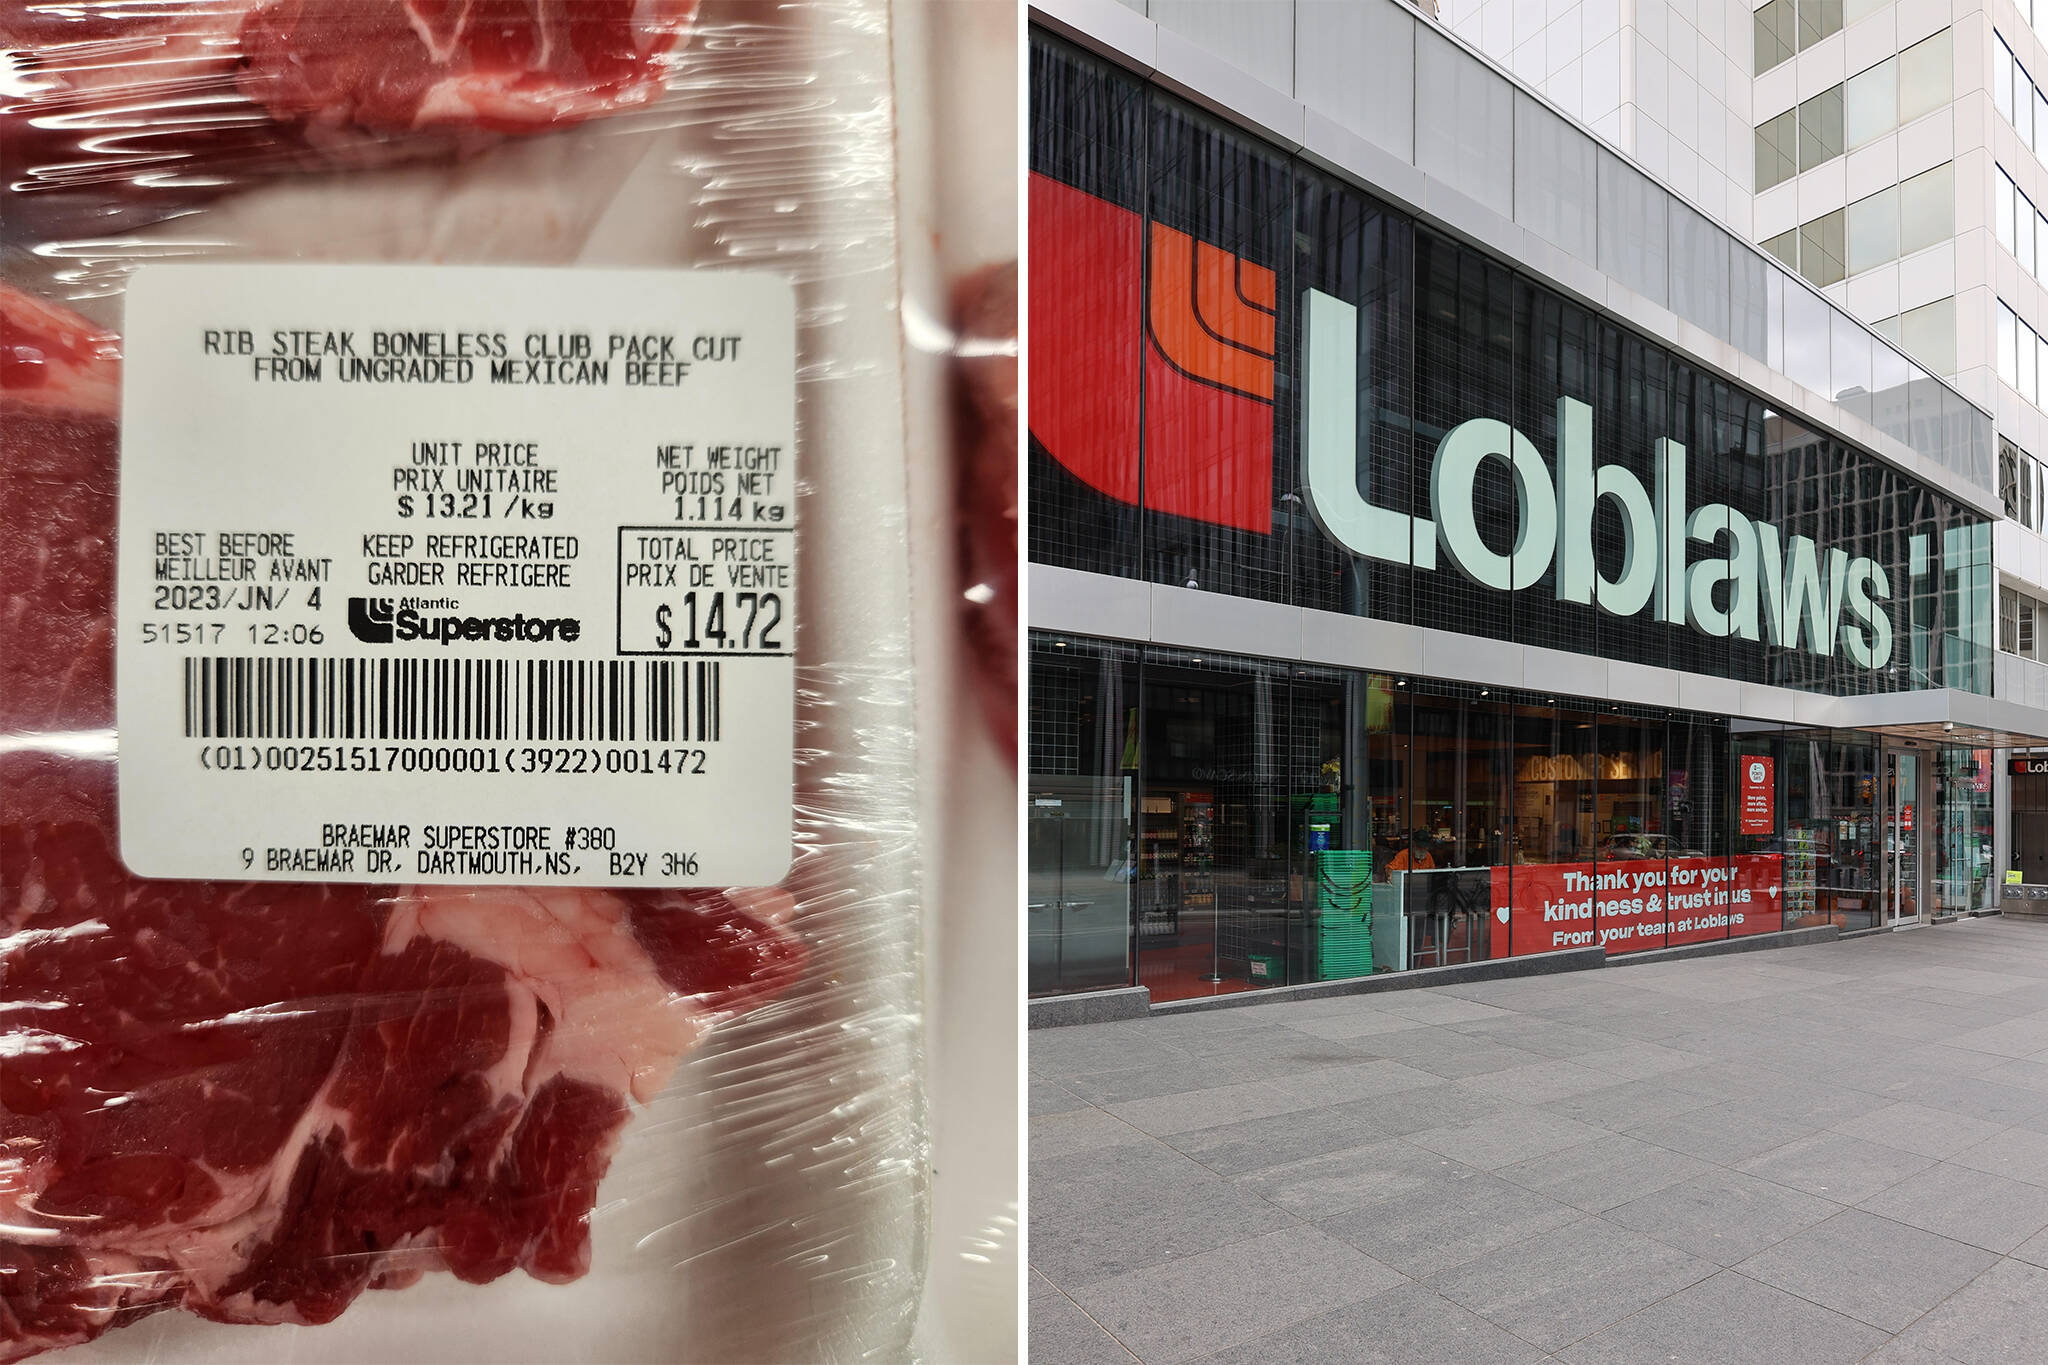 If you have spotted ungraded beef at your grocery store recently – i